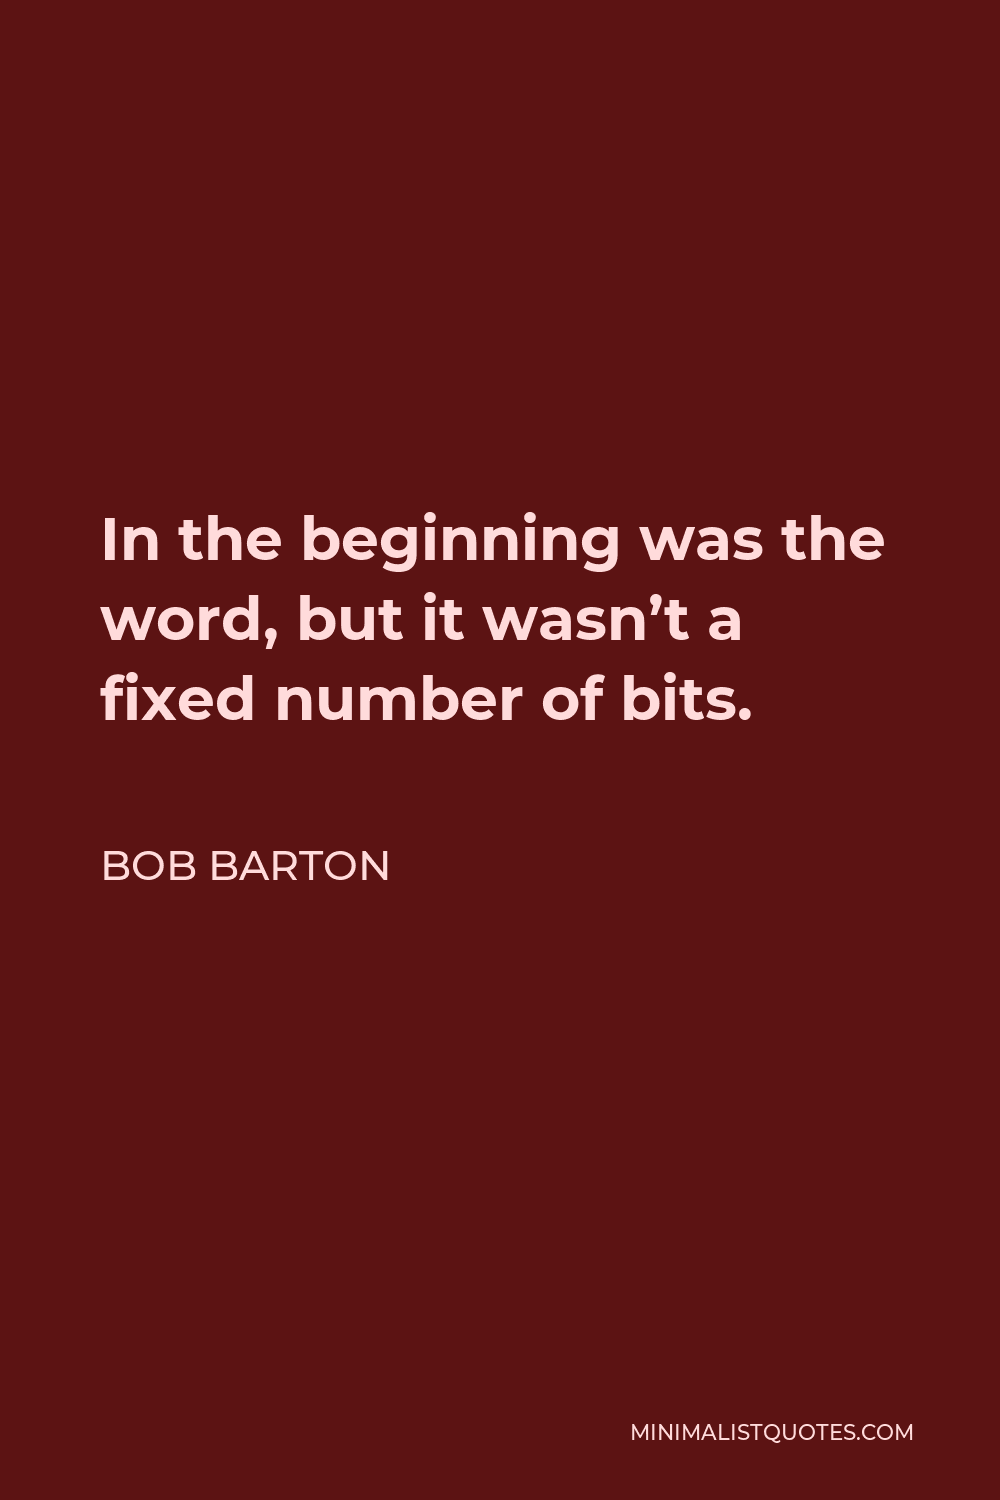 Bob Barton Quote - In the beginning was the word, but it wasn’t a fixed number of bits.